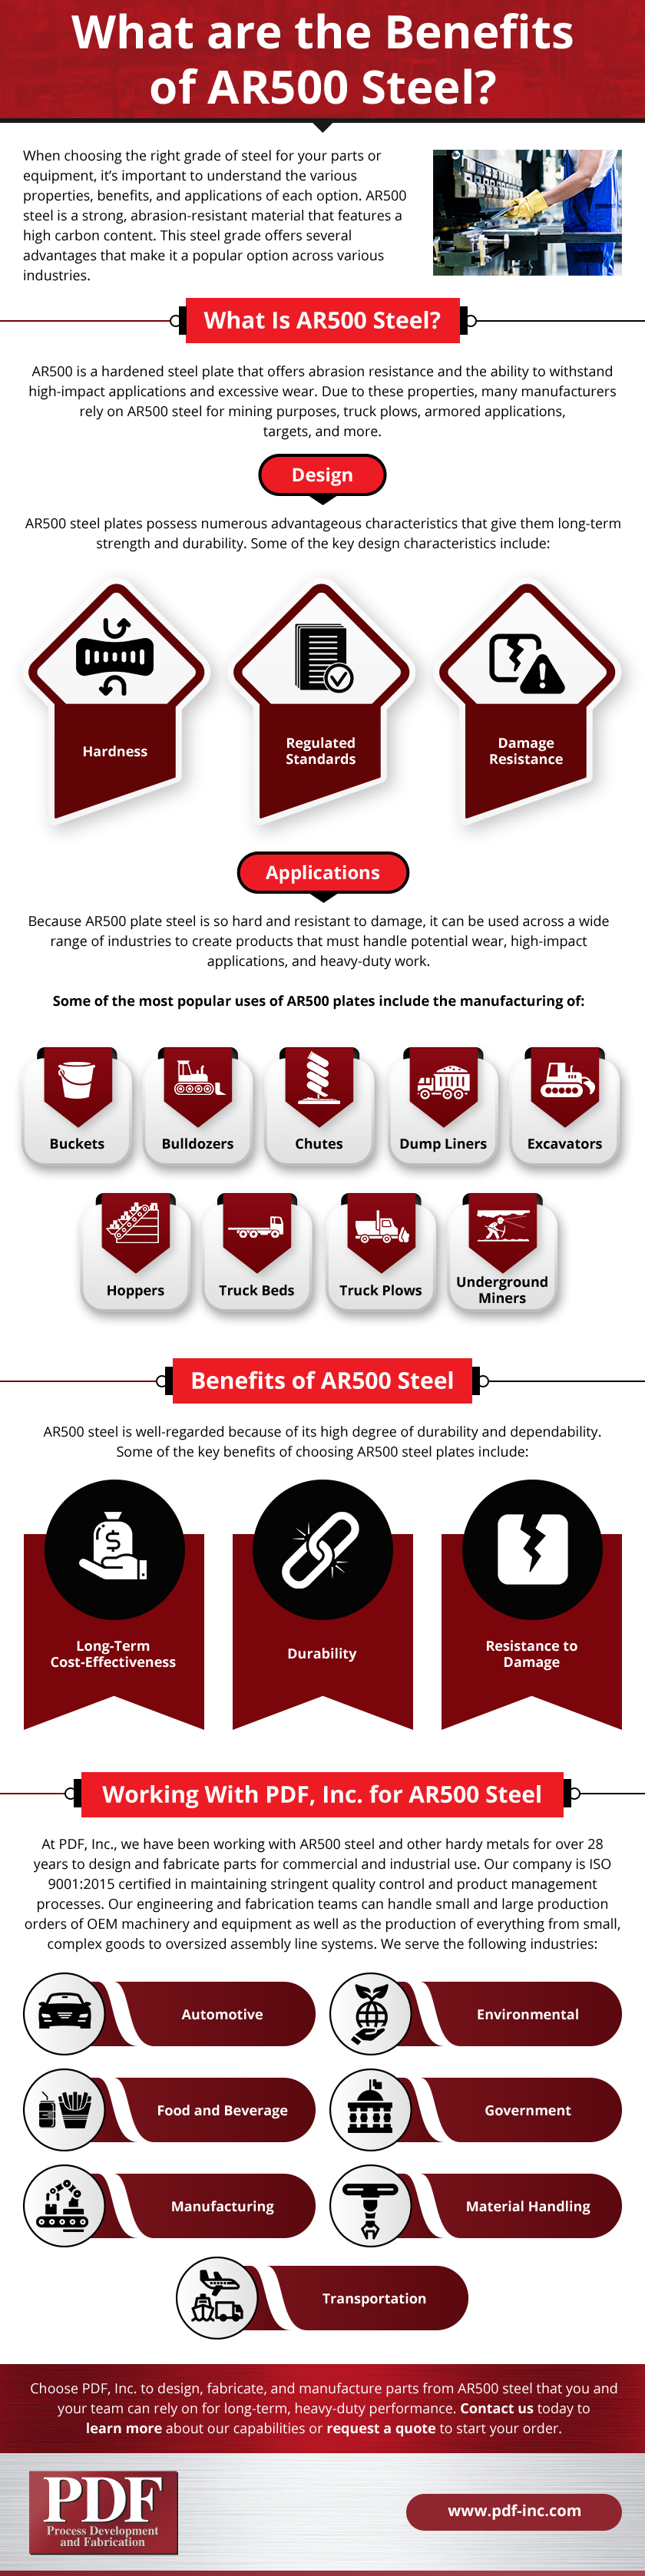 What are the Benefits of AR500 Steel?” data-lazy-src=